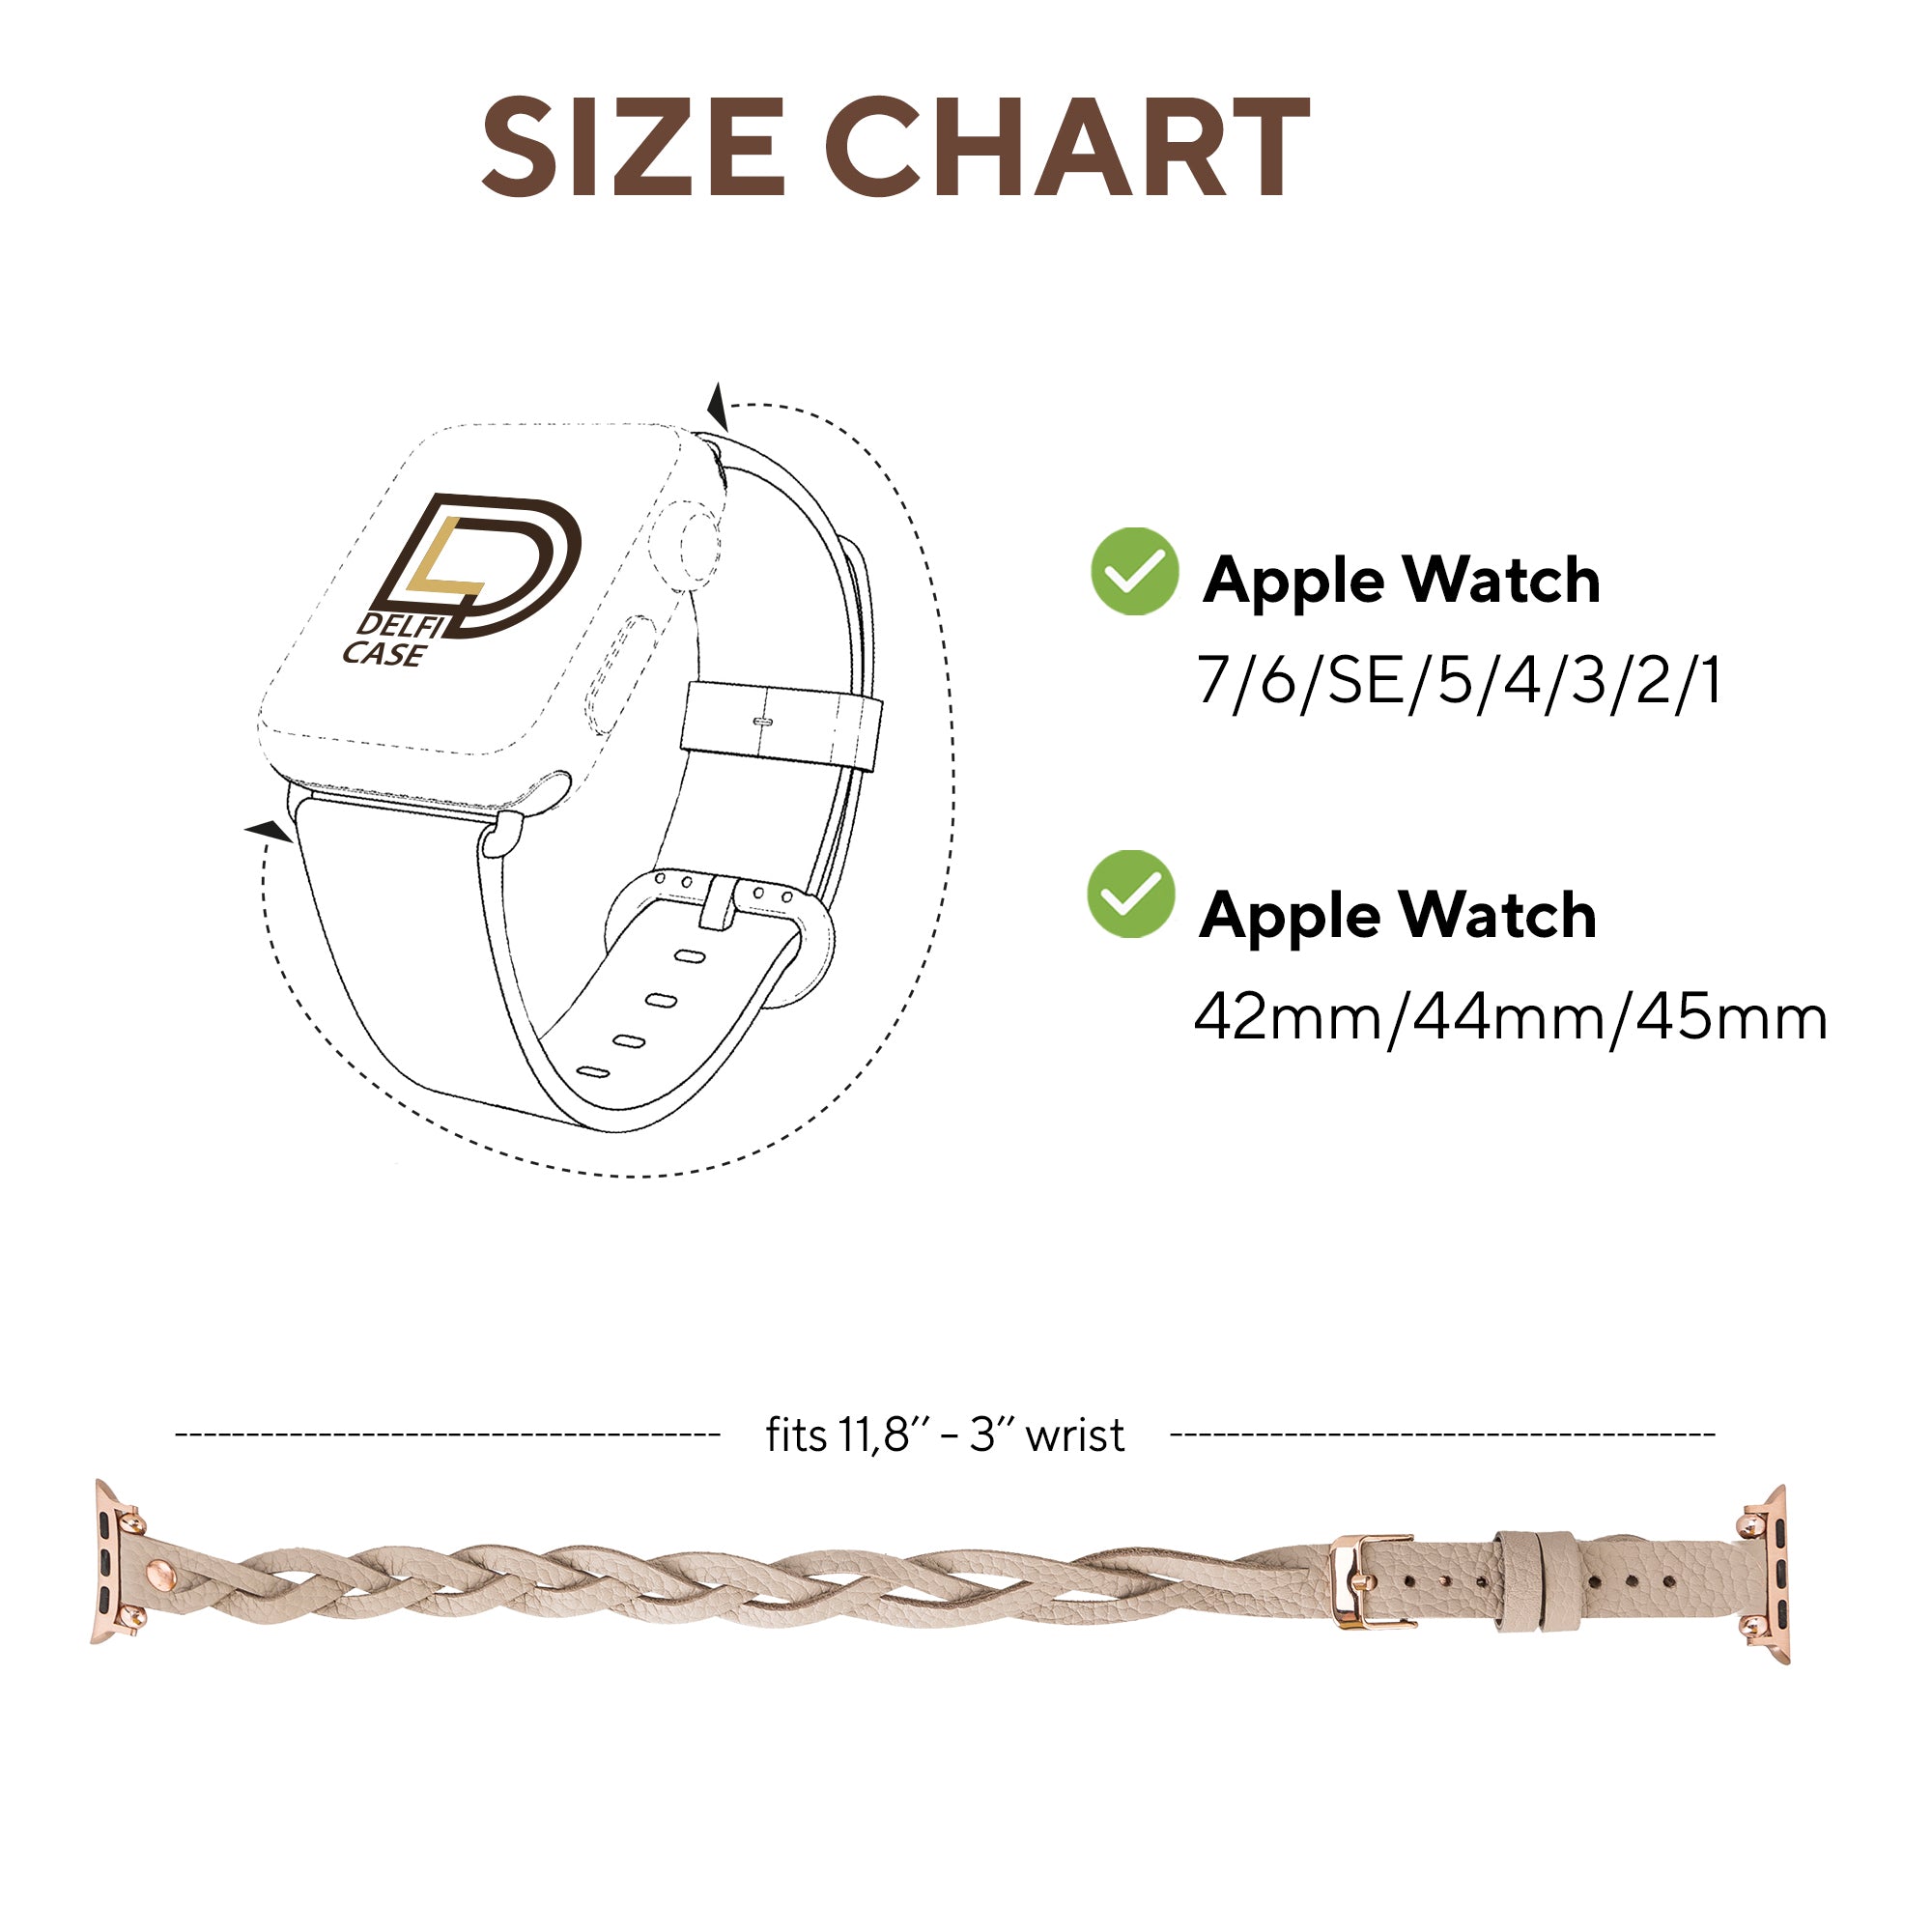 DelfiCase Sheffield Double Tour Watch Band for Apple Watch & Fitbit/Sense 26